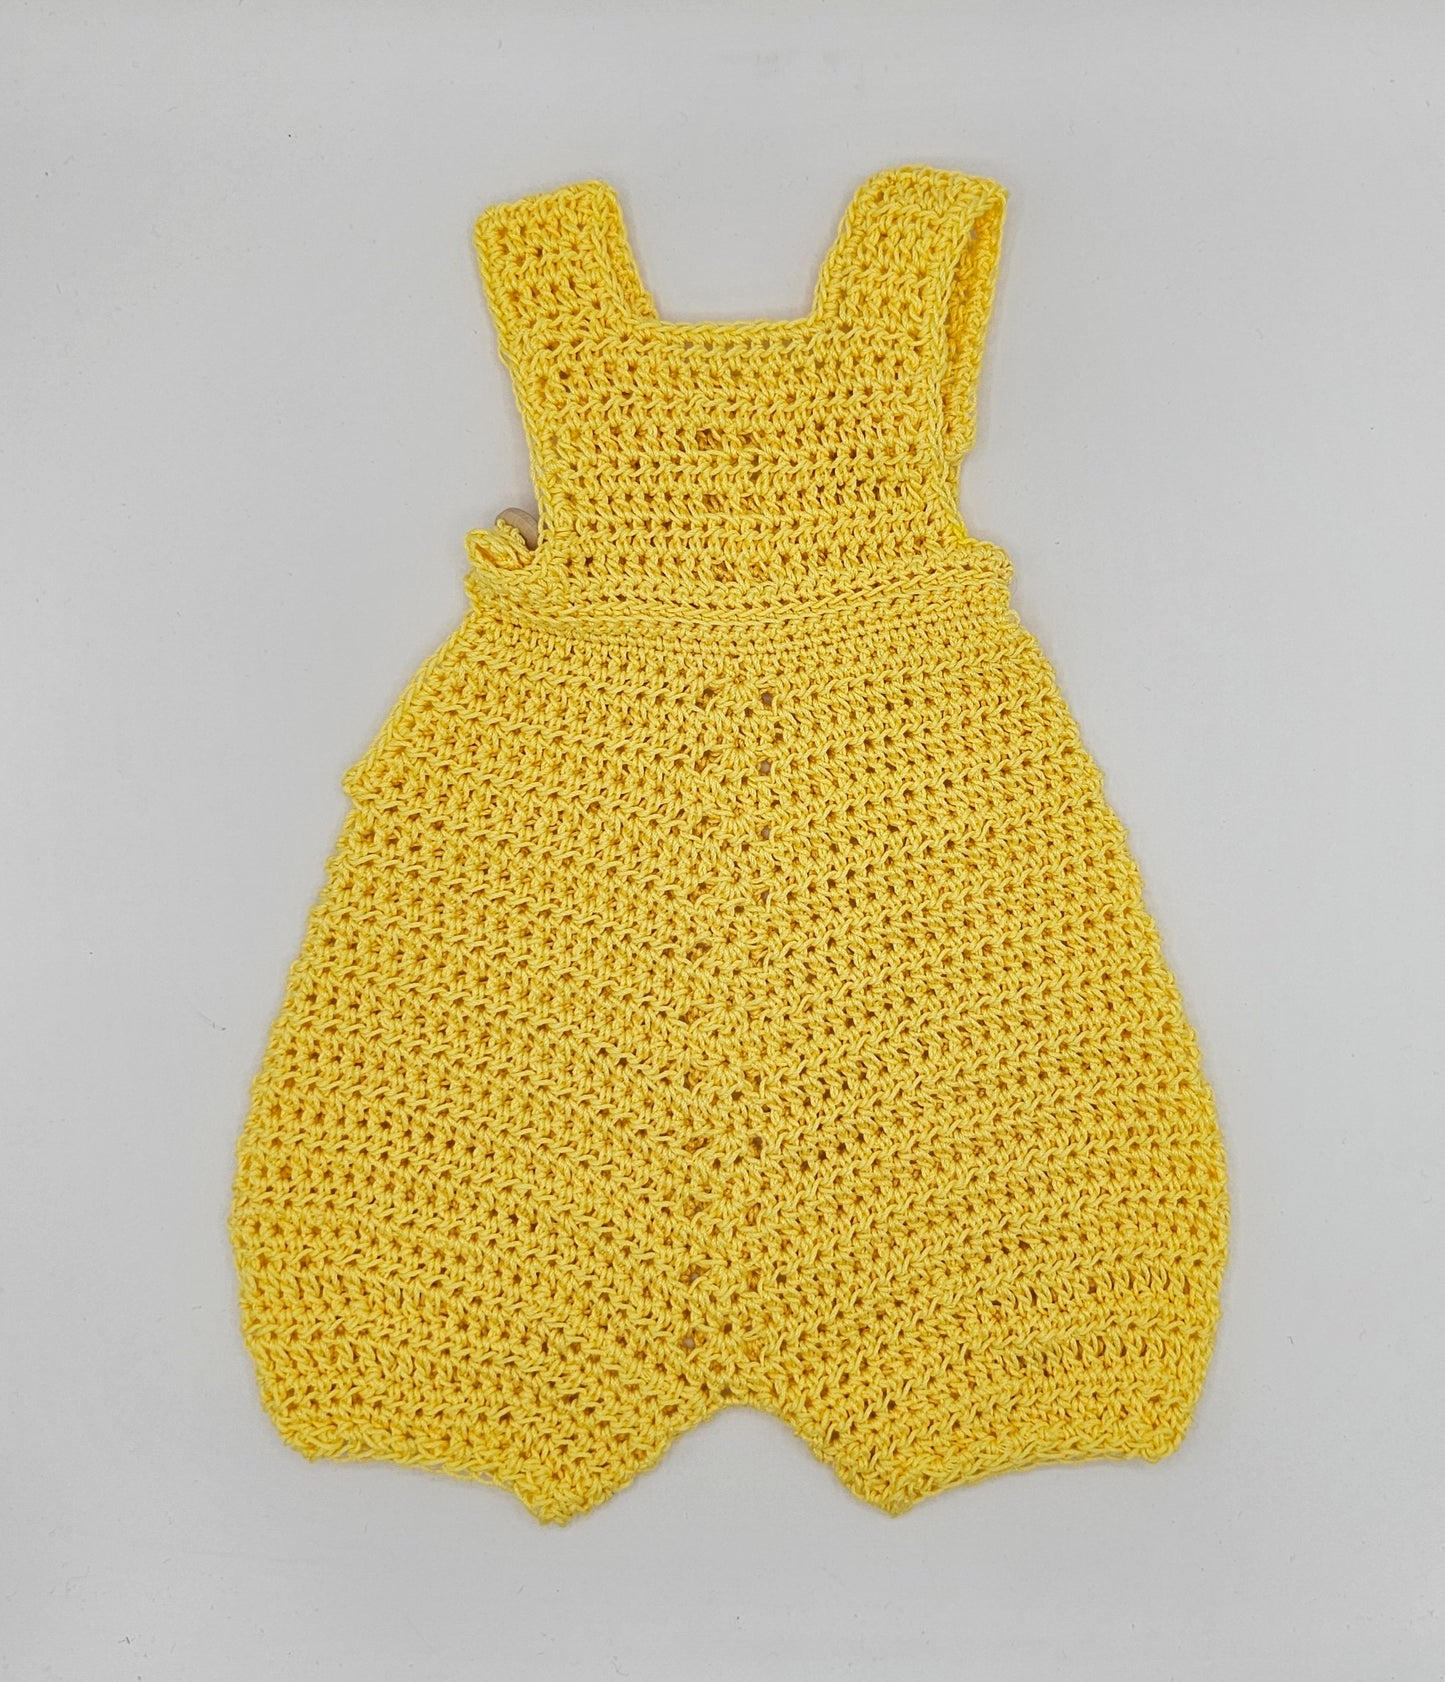 Unisex Overalls and Shoes 0-3 months